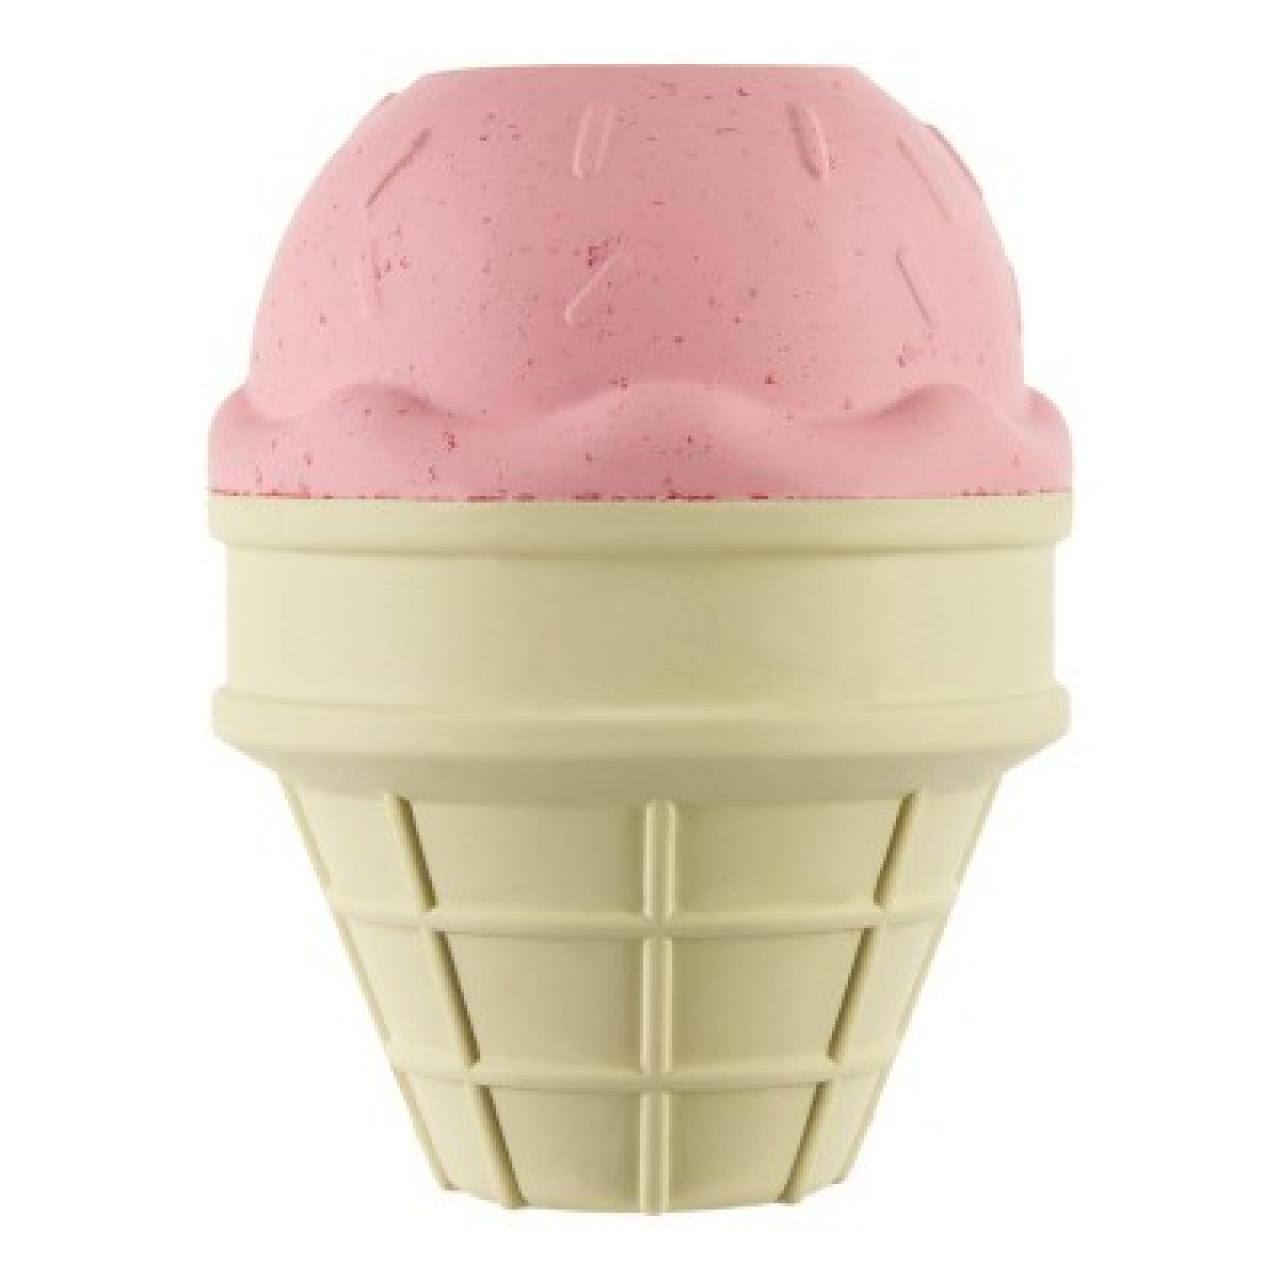 https://food.fnr.sndimg.com/content/dam/images/food/products/2023/1/25/rx_bark-super-chewer-i-squeak-cone-ice-cream-dog-toy.jpeg.rend.hgtvcom.1280.1280.suffix/1674678400623.jpeg